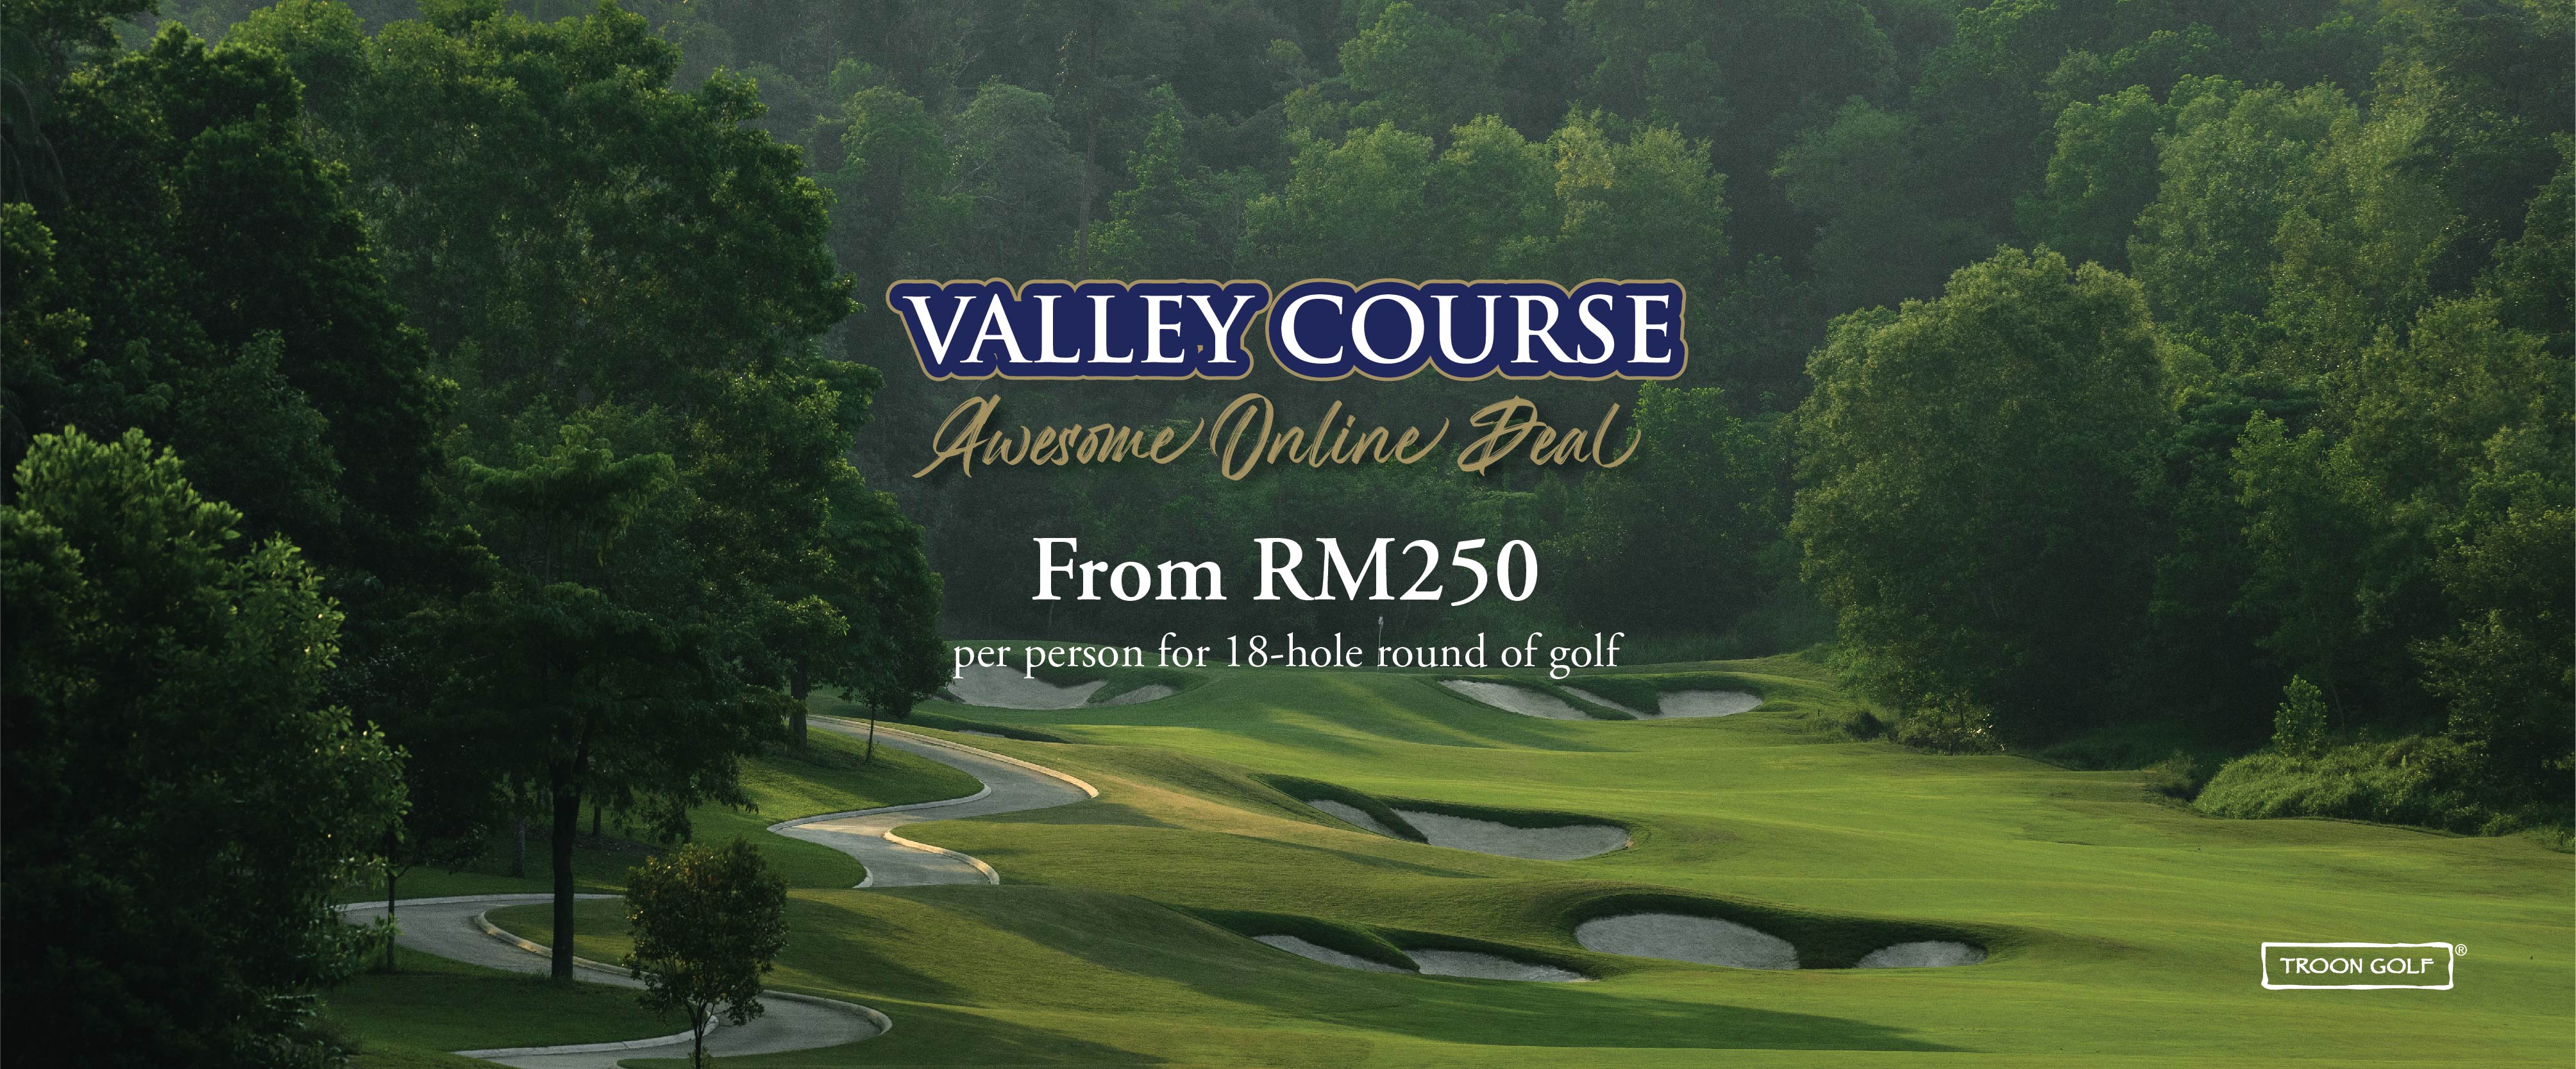 The Els Club Desaru Coast Valley Course Awesome Online Deal